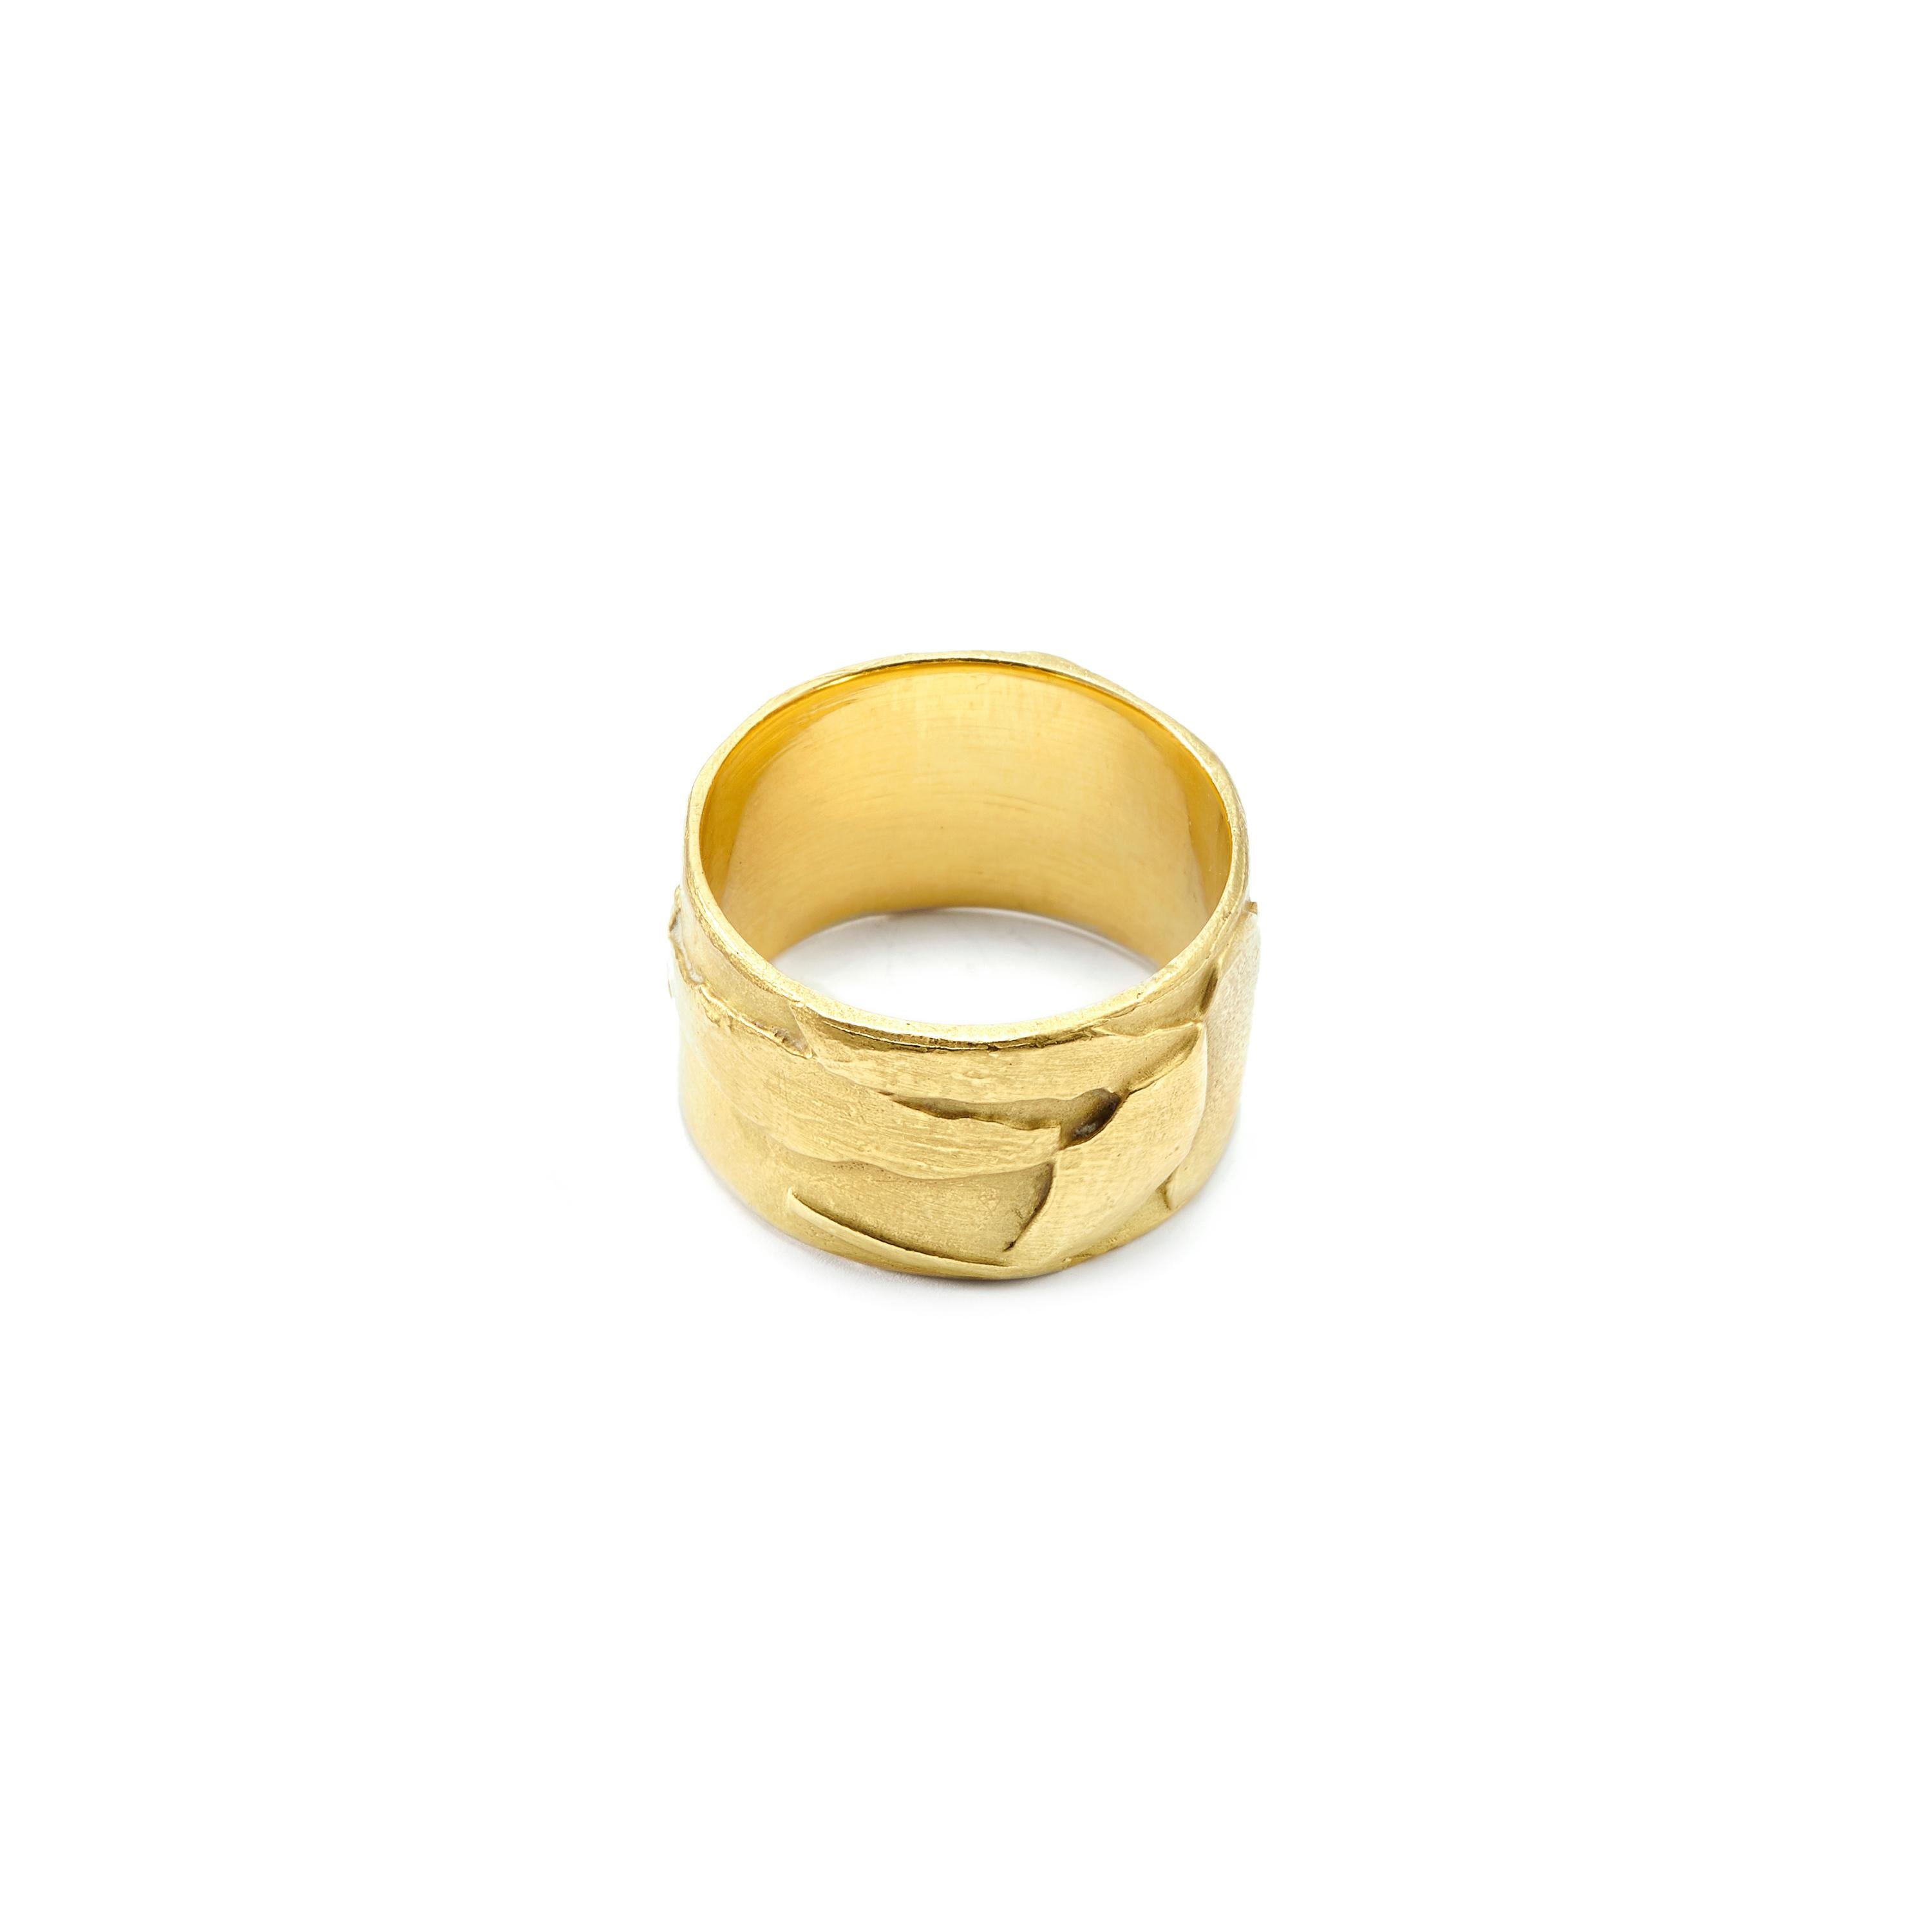 This unique 18 Karat Gold Wide Band Ring was designed by Susan Lister Locke. She was inspired by the flora and fauna of Tuscany while taking a class in the region. A lovely addition to any collection as well as a modern alternative to a wedding or